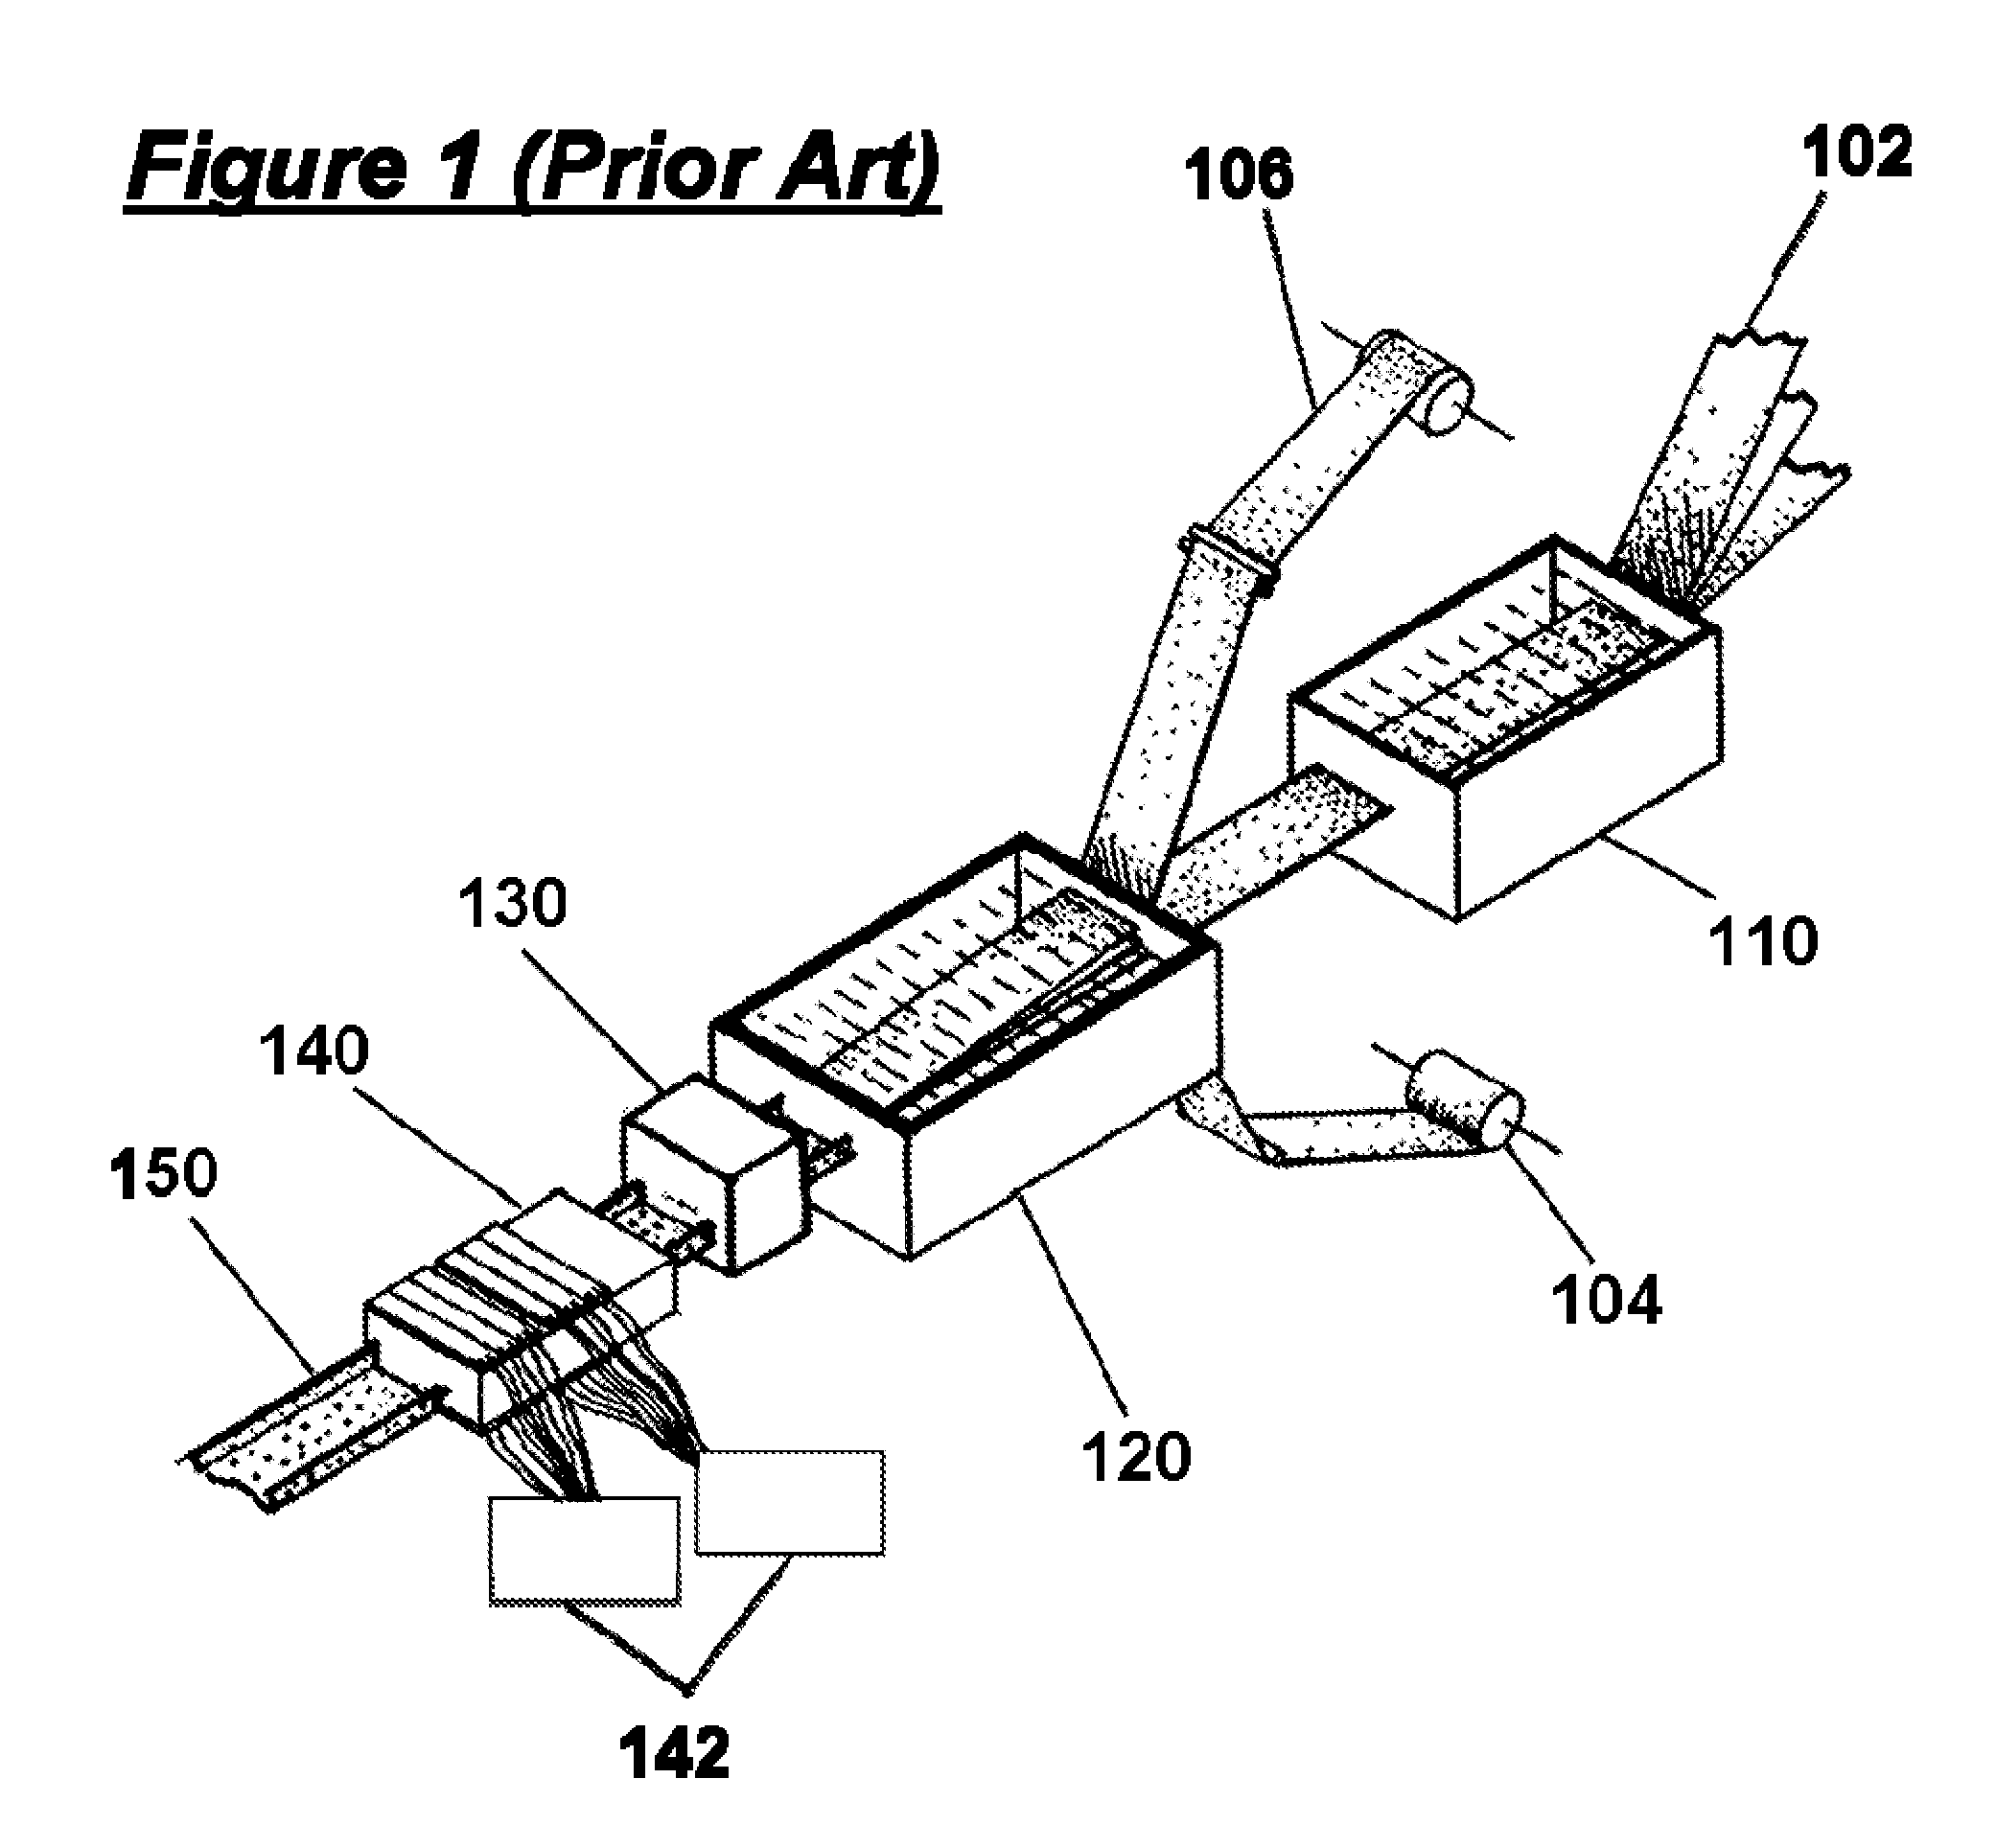 Wing and blade structure using pultruded composites